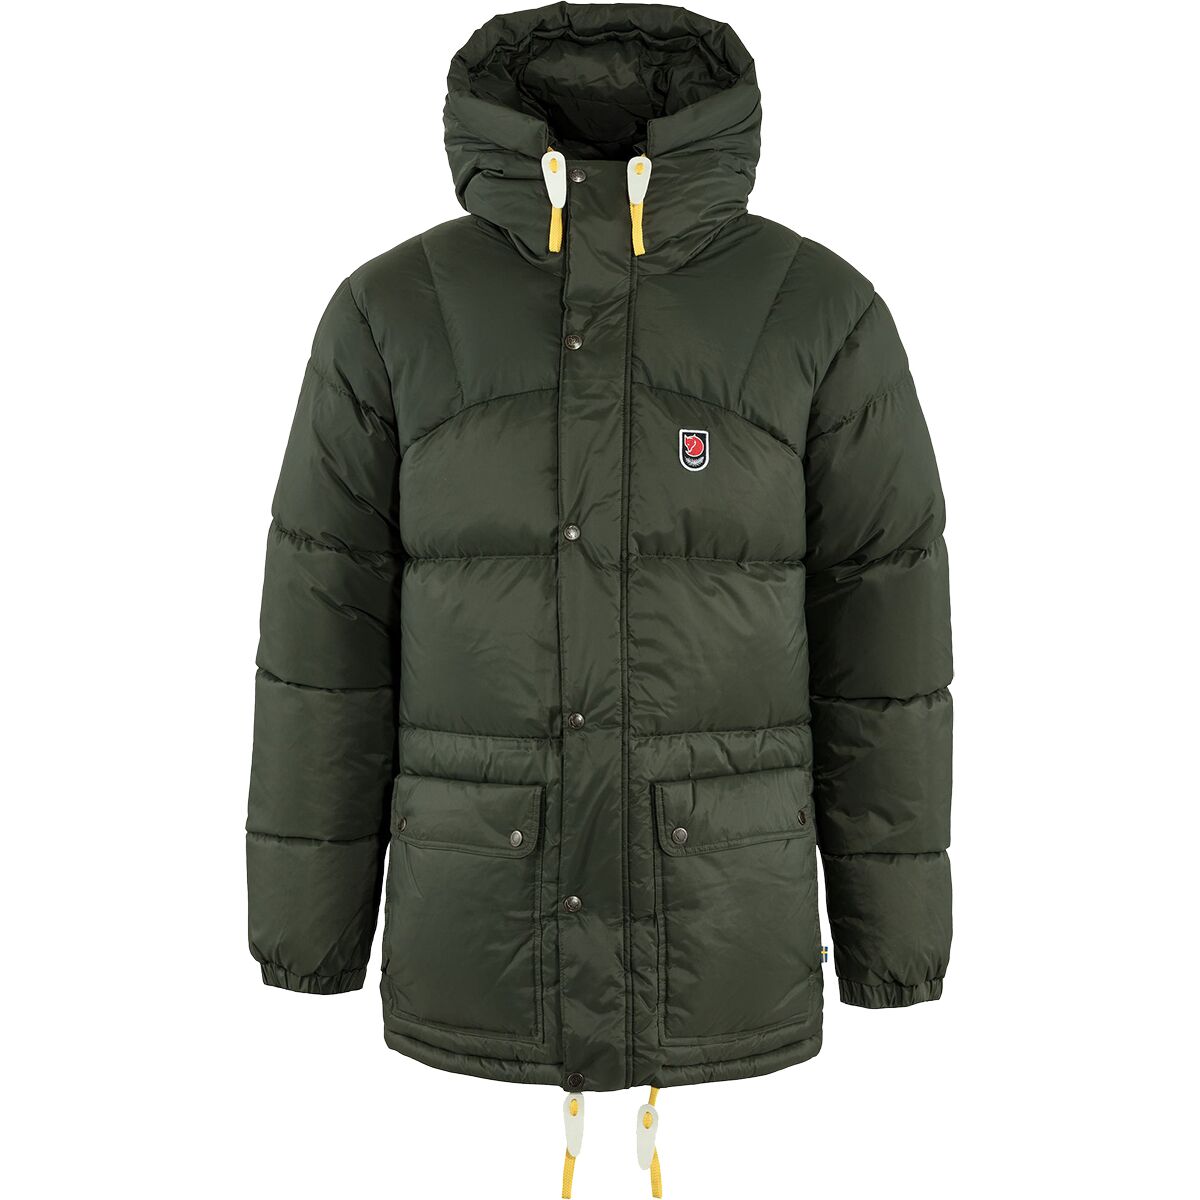 Fjallraven Expedition Down Jacket - Men's - Clothing